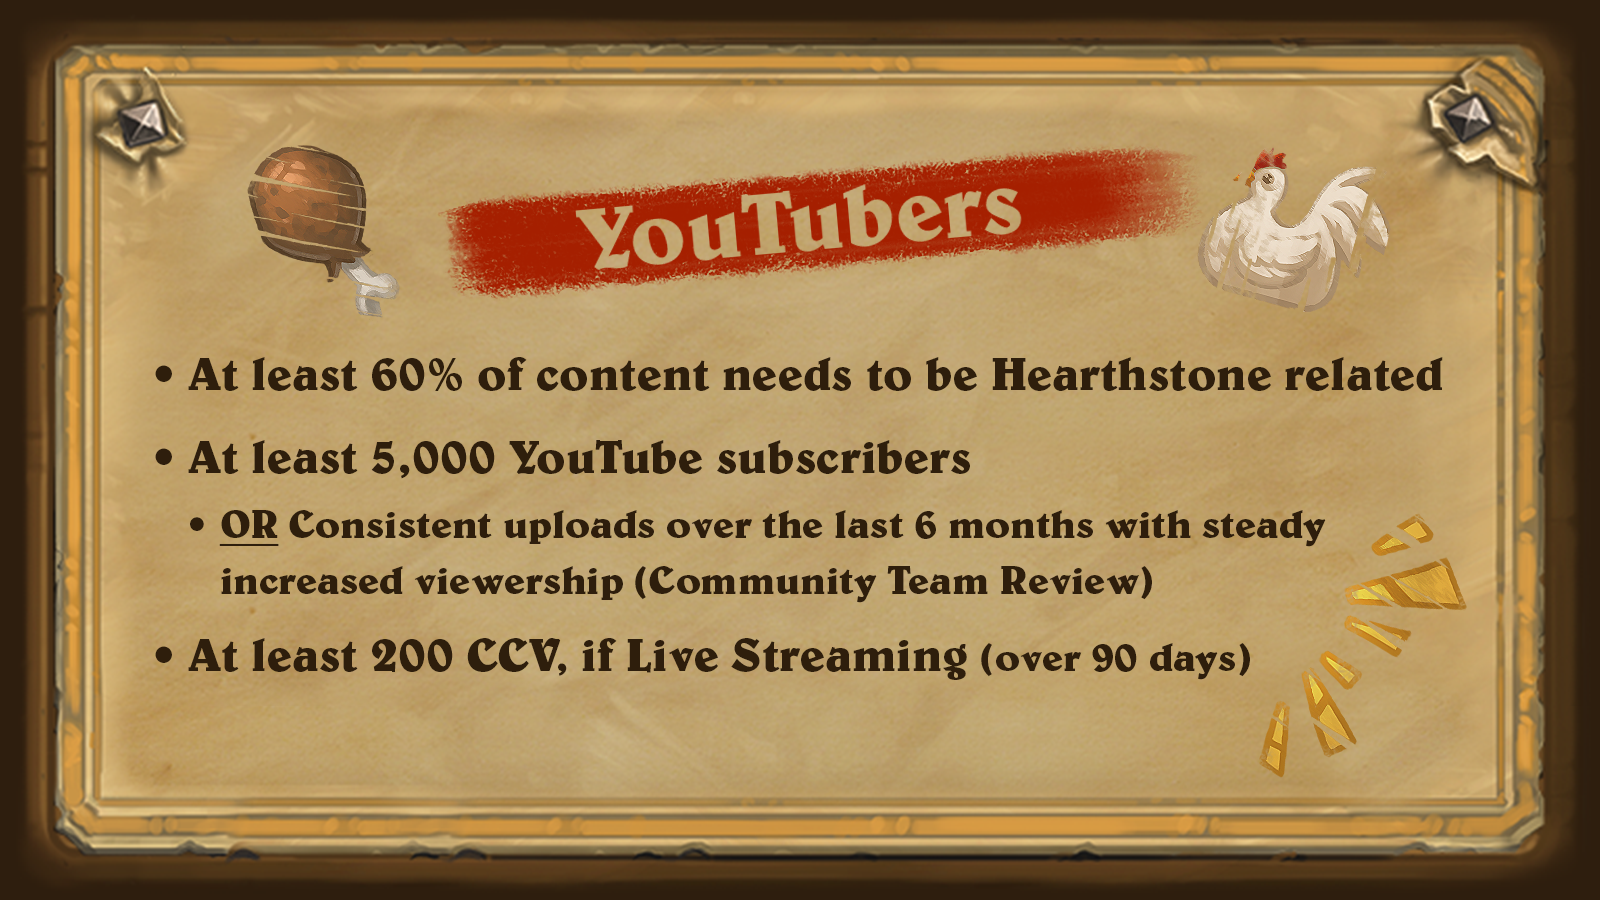 At least 60% of content needs to be Hearthstone related. At least 5,000 YouTube subscribers. At least 200 CCV, if Live Streaming (Over 90 days).